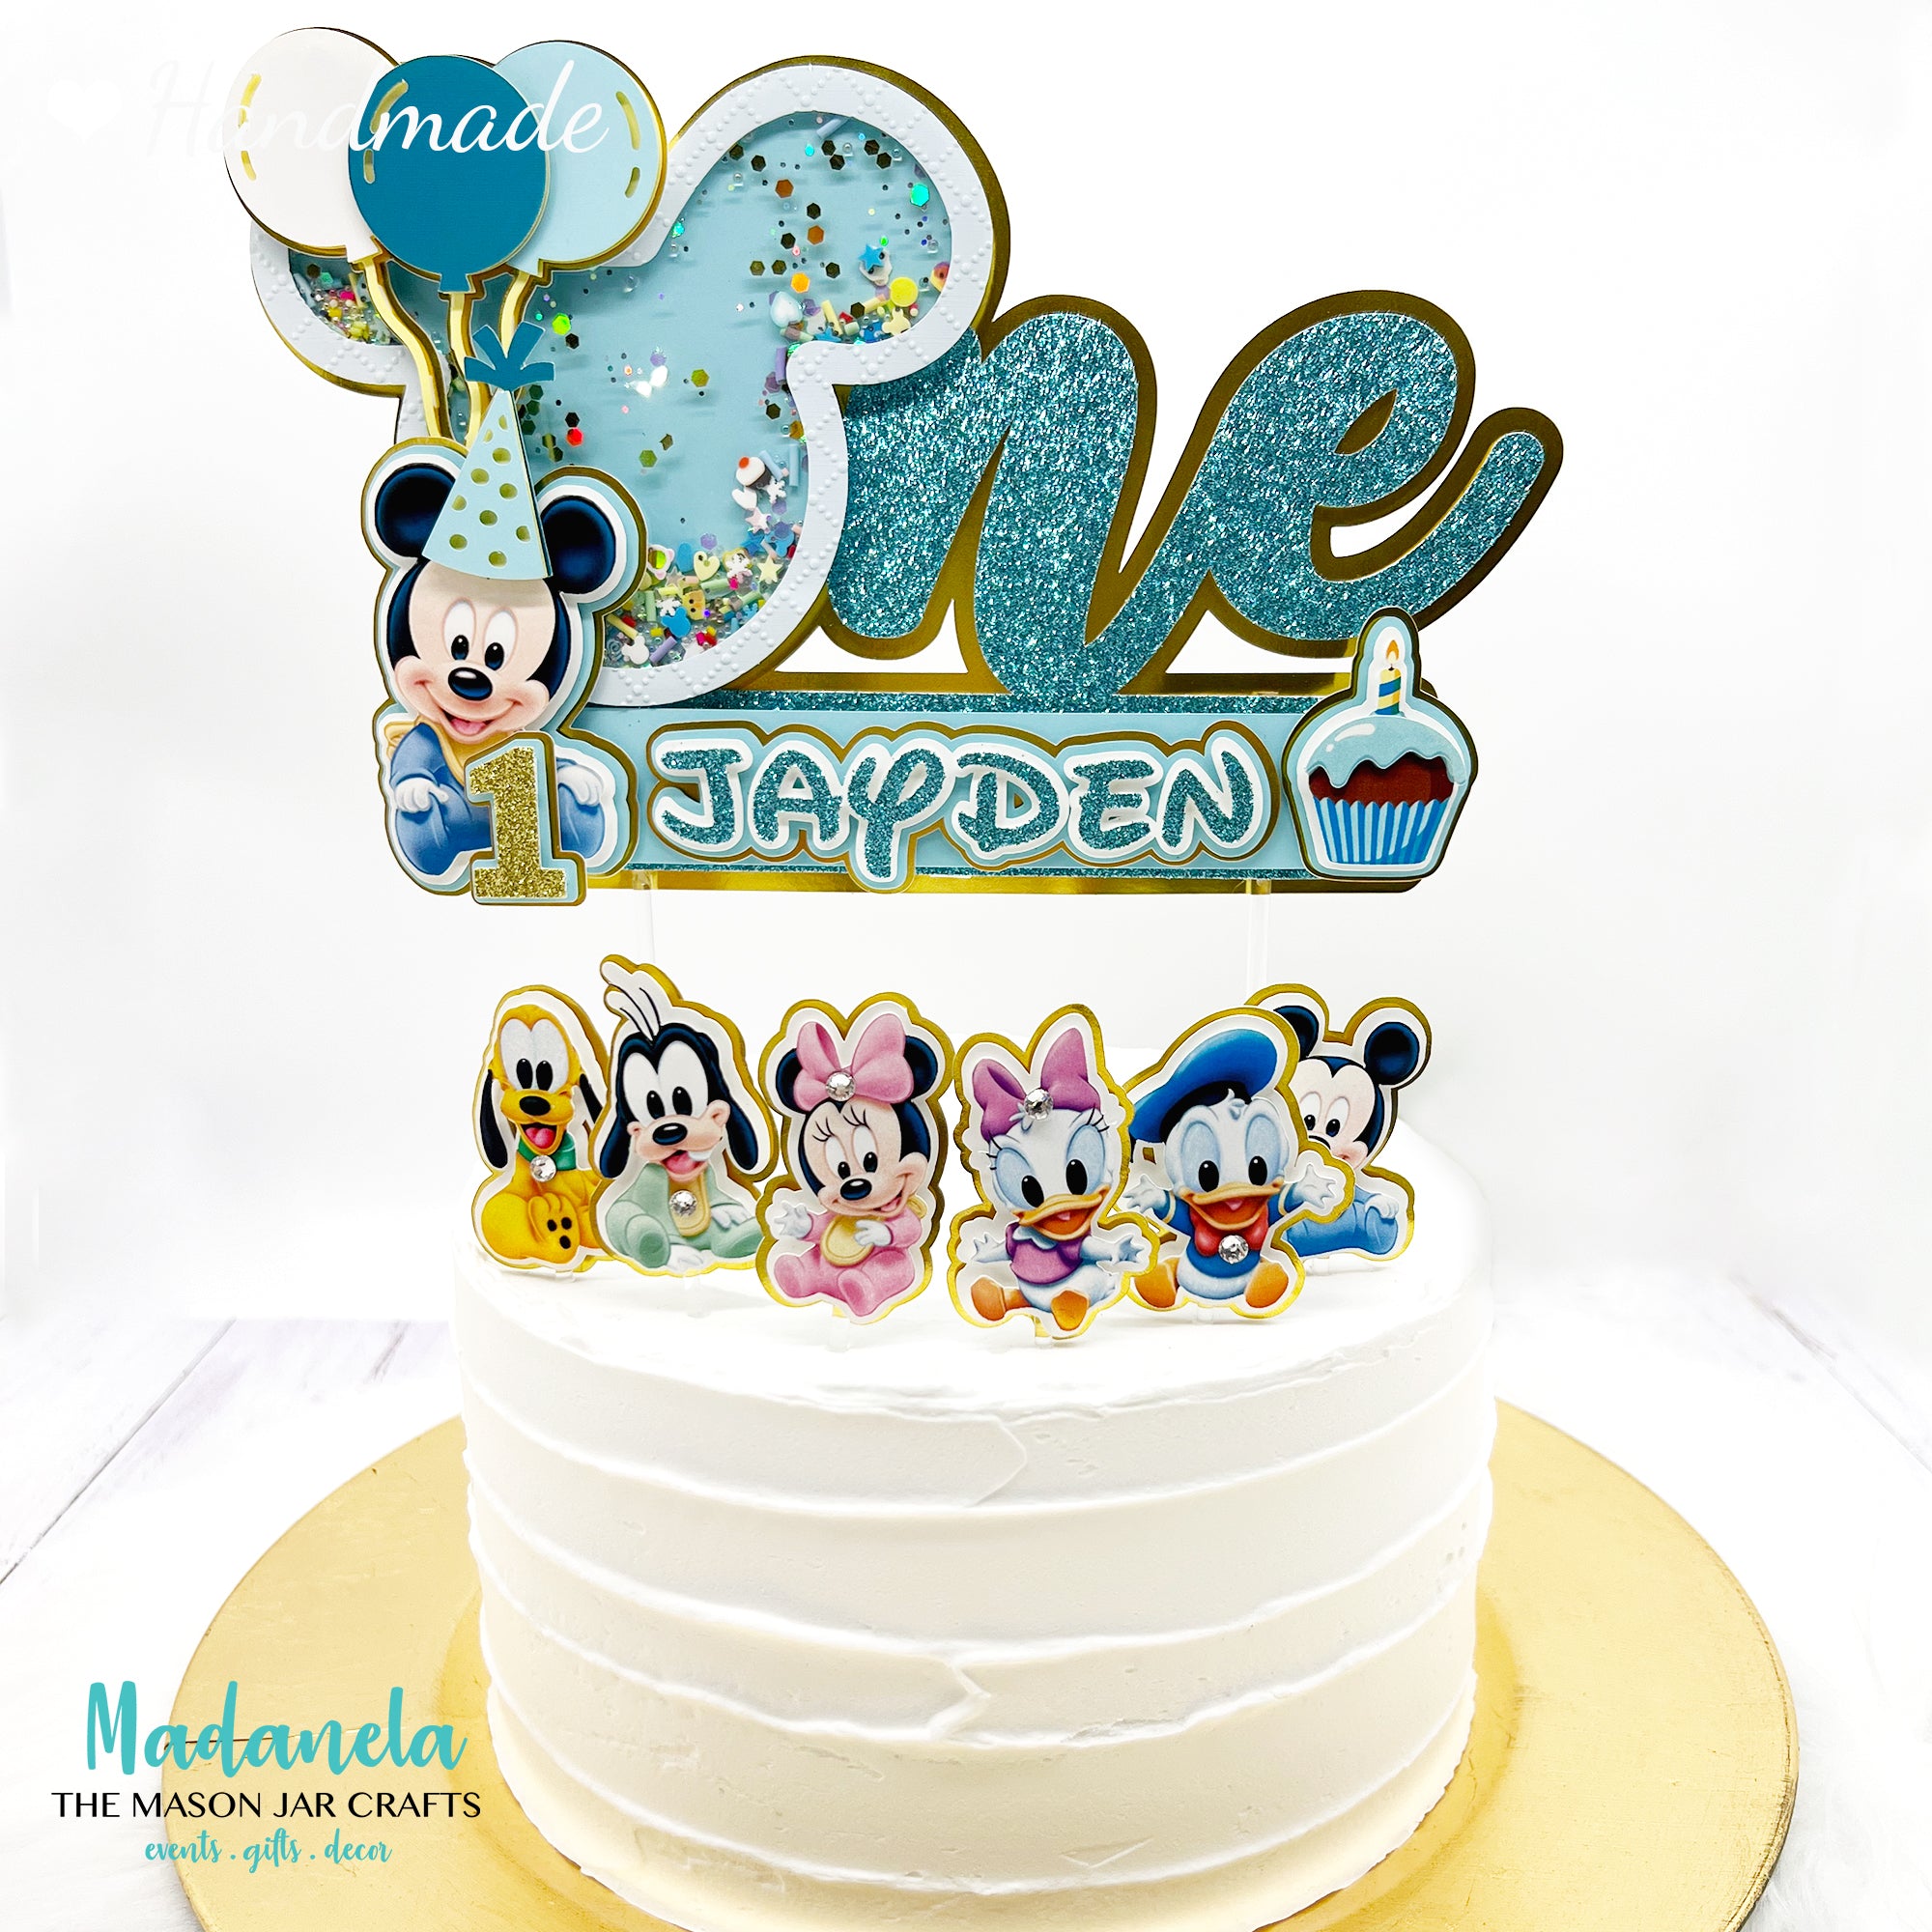 Send Appetizing Mickey Mouse Shape Cake for Birthday to Kerala, India -  Page Details : keralaflowersgifts.com